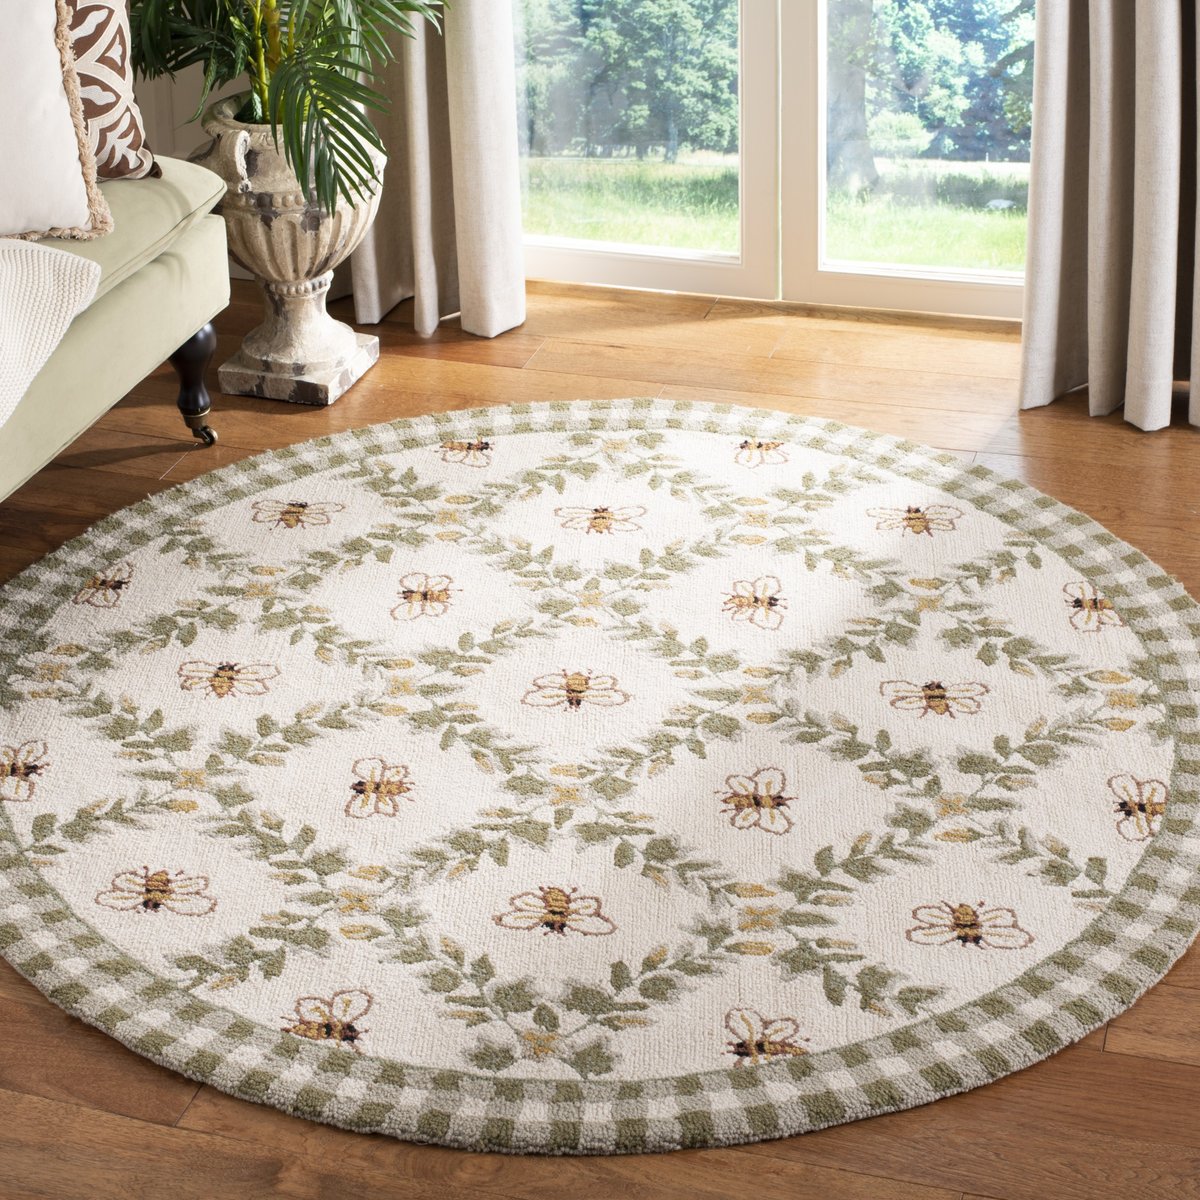 SAFAVIEH Chelsea Collection Area Rug - 4' Round, Black & Multi, Hand-Hooked  French Country Wool, Ideal for High Traffic Areas in Living Room, Bedroom